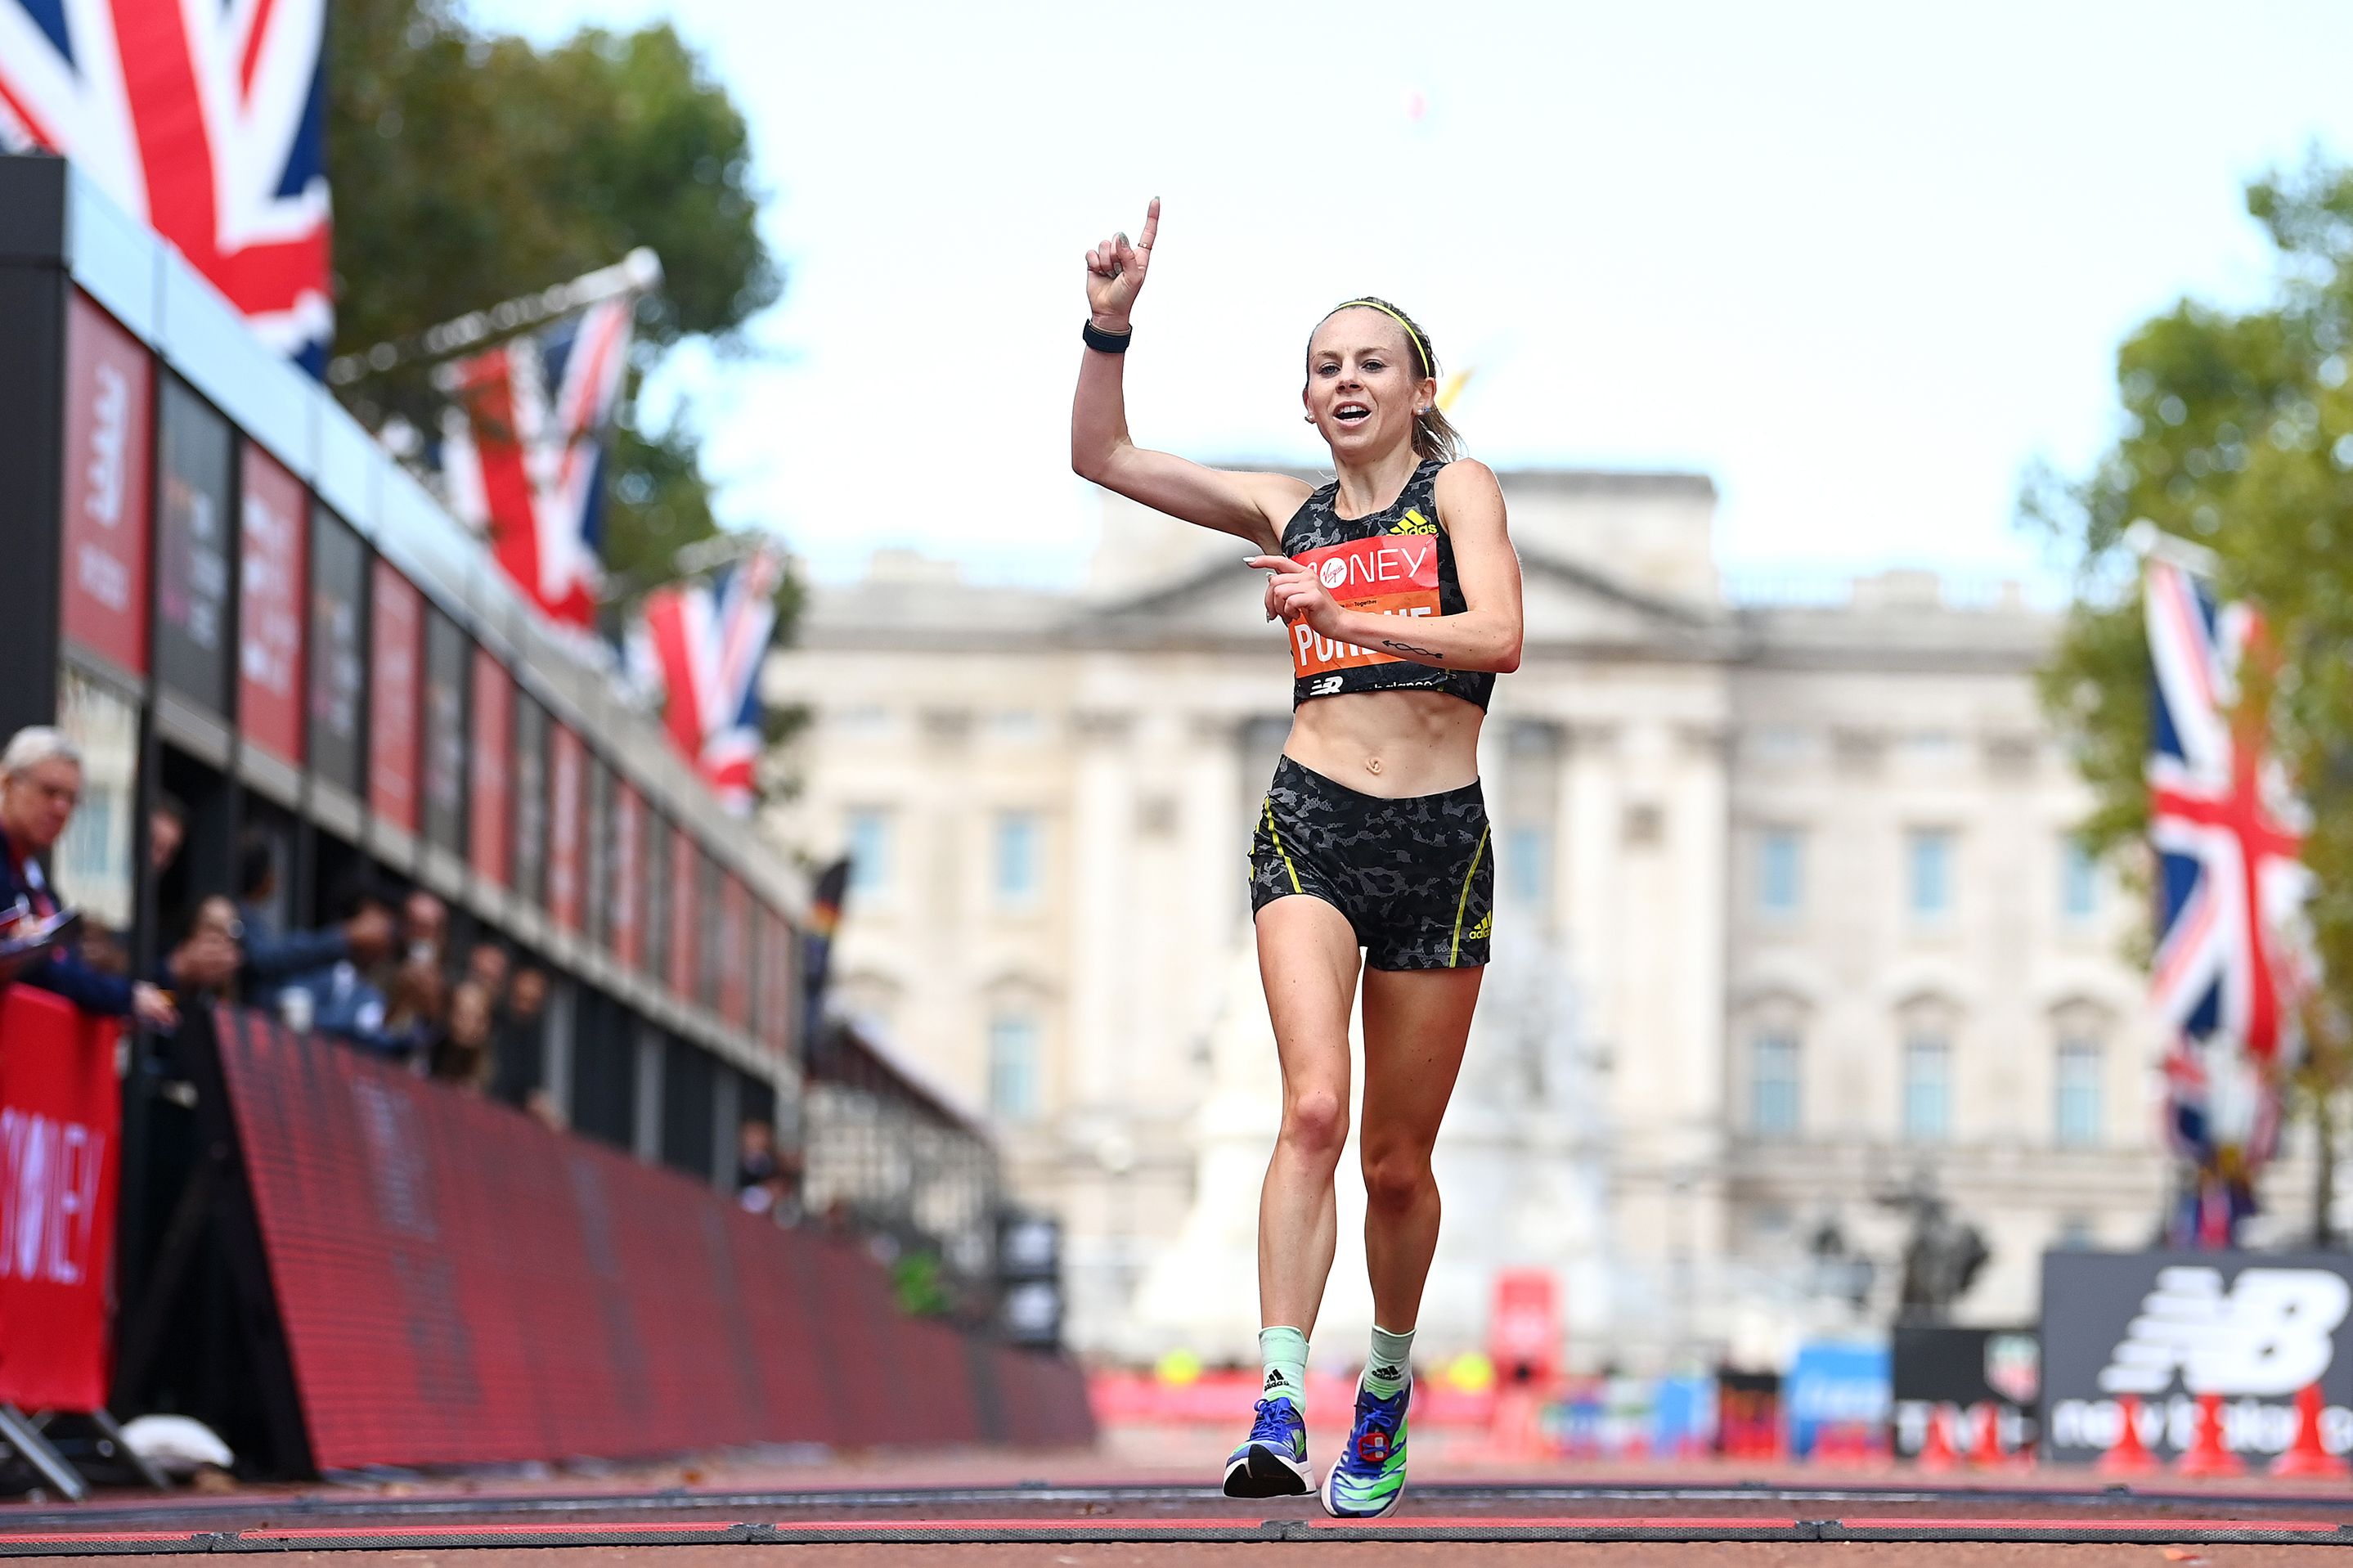 5 things we learned from the London Marathon elite women’s press